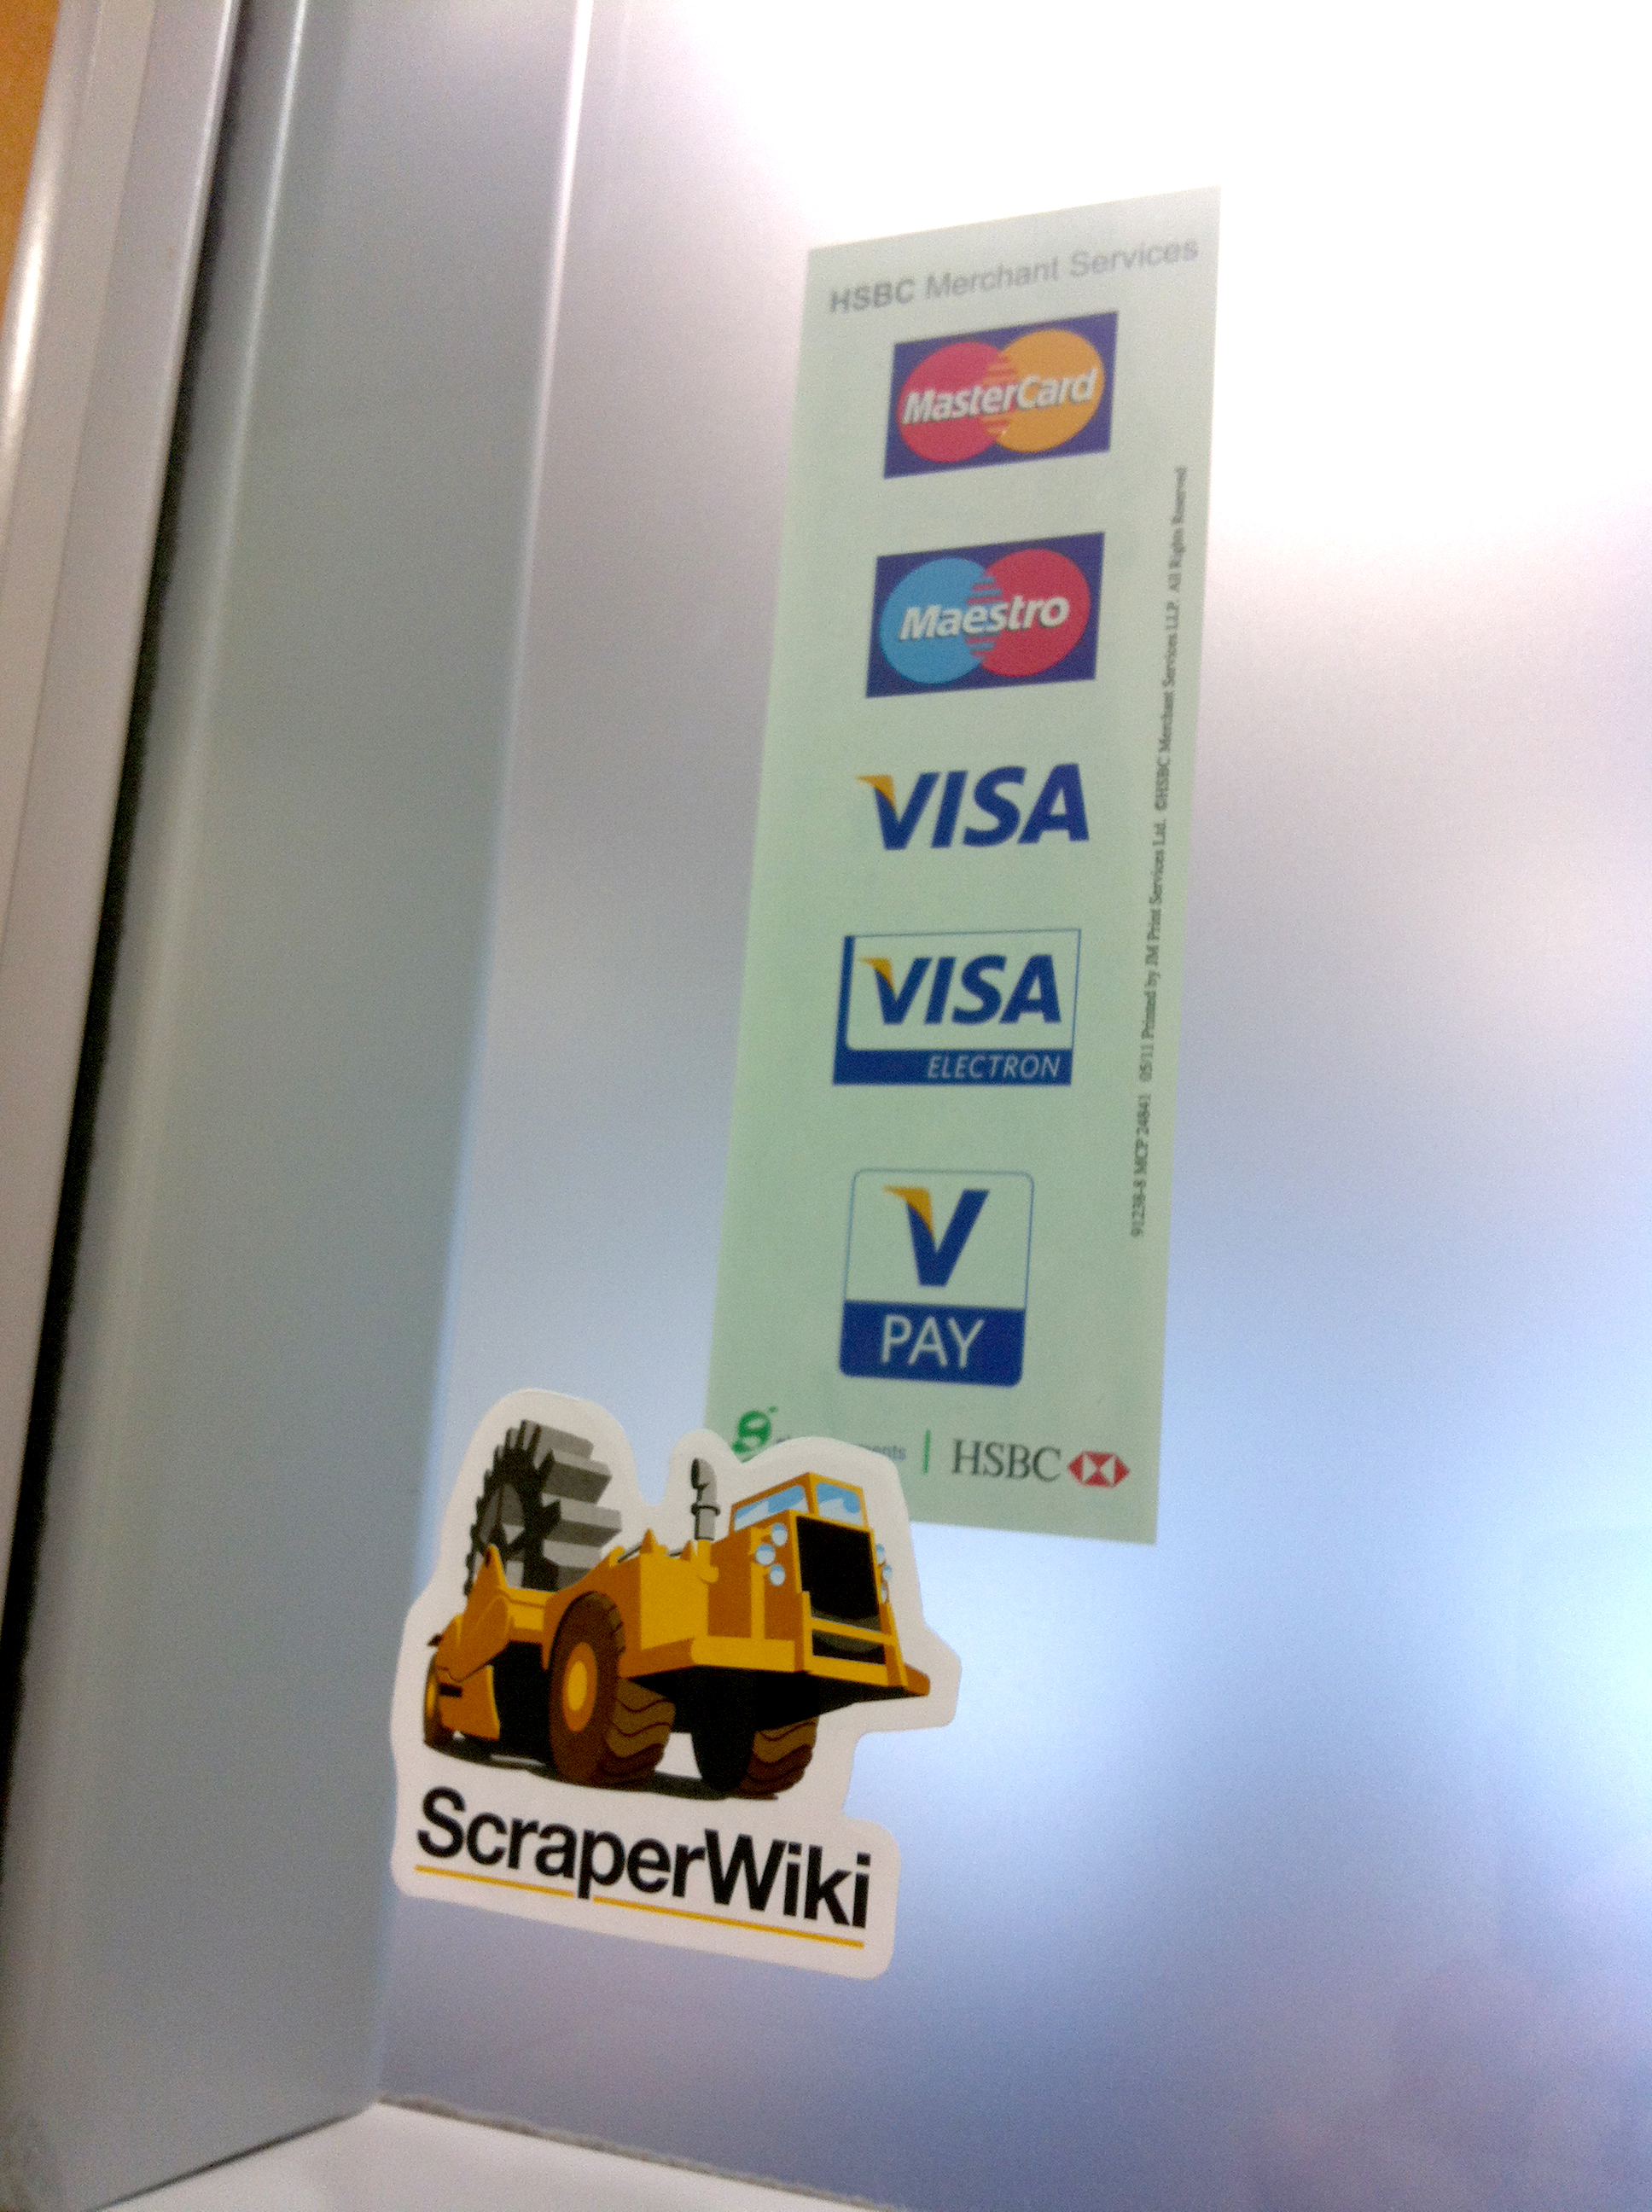 ScraperWiki digger in front of credit card payment logos